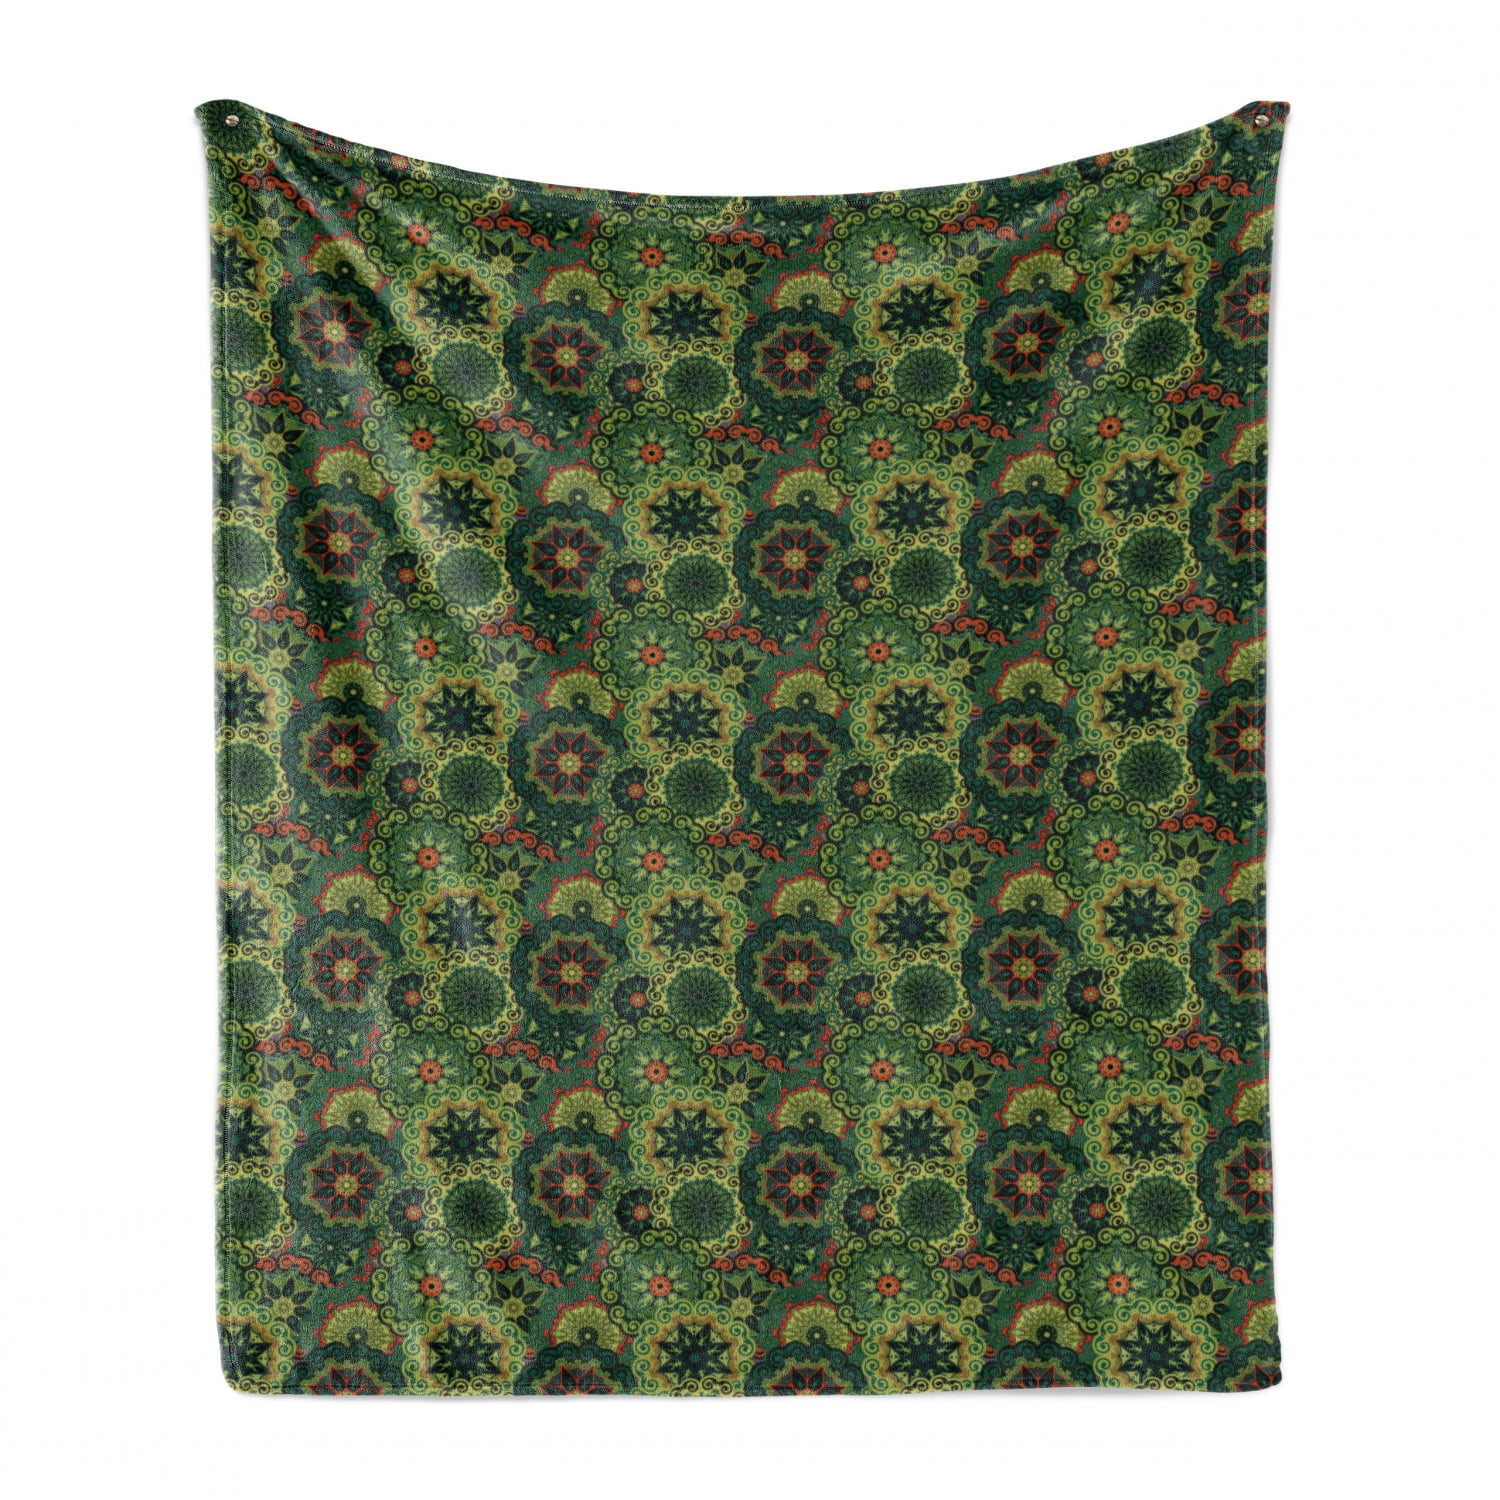 Ambesonne Mandala Soft Flannel Fleece Throw Blanket Overlapping Retro Antique Round Flowers Native Culture Pale Green Dark Green 50 x 60 Cozy Plush for Indoor and Outdoor Use